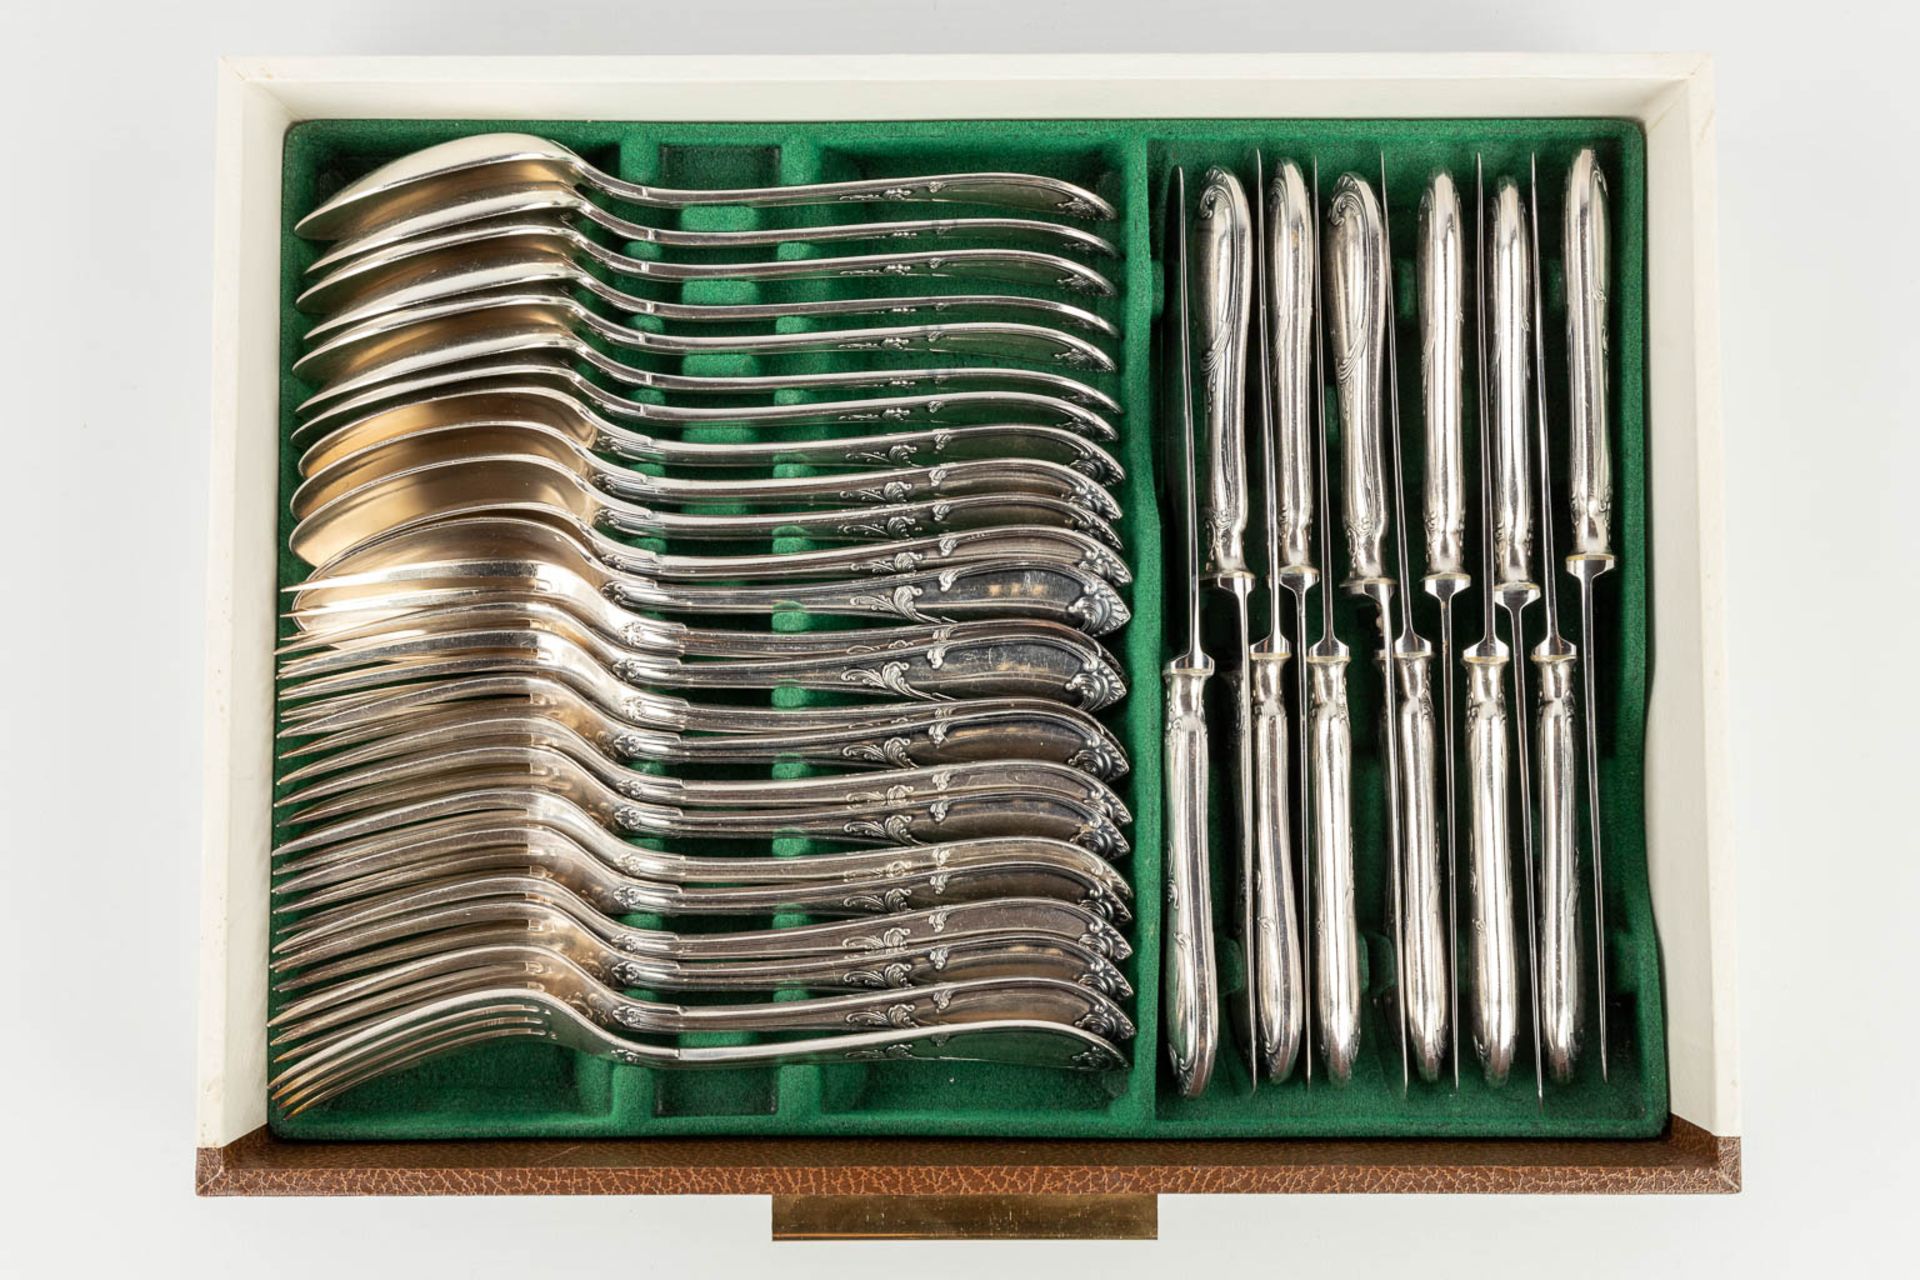 B. Wiskemann, Bruxelles, a silver-plated cutlery set, Louis XV style. (L: 30 x W: 39 x H: 22 cm) - Image 24 of 24